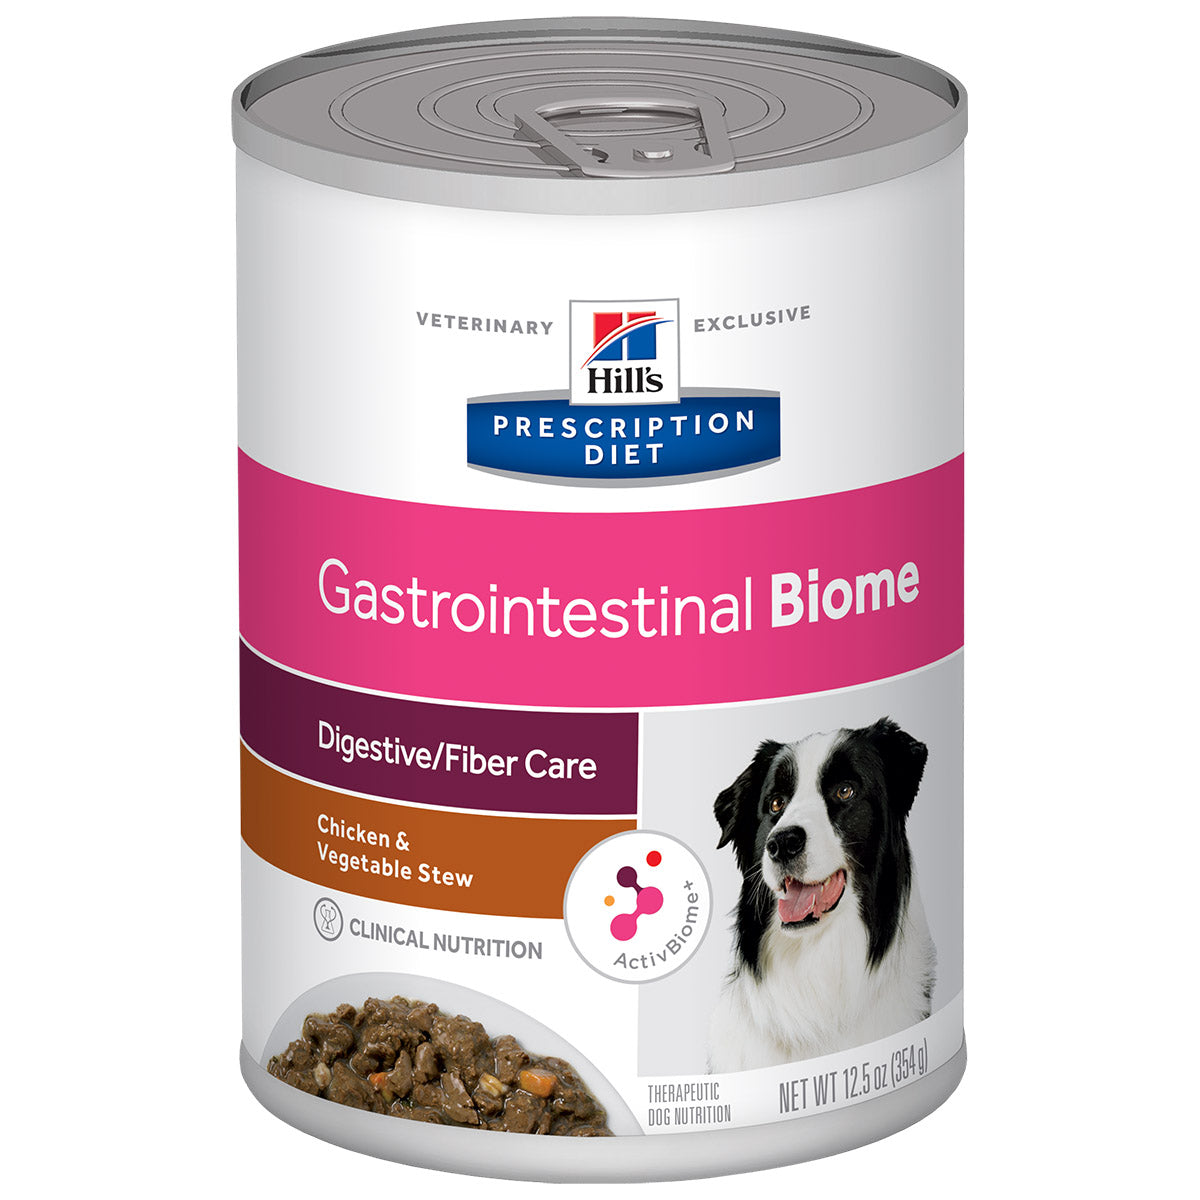 Hill's Gastrointestinal Biome Canine